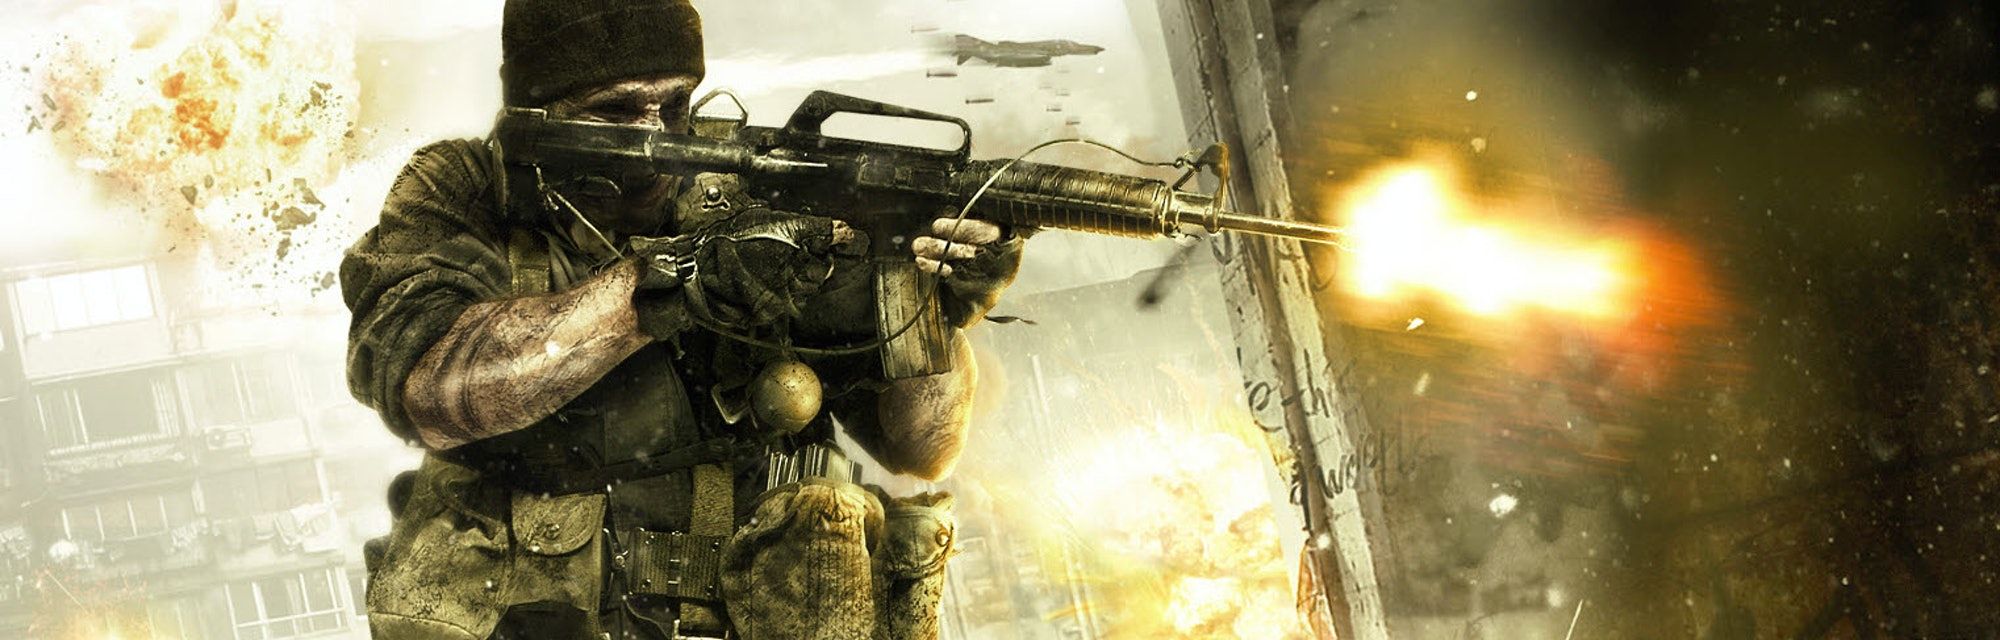 Call of Duty: Black Ops Cold War' leaks seem to confirm CoD 2020 rumors